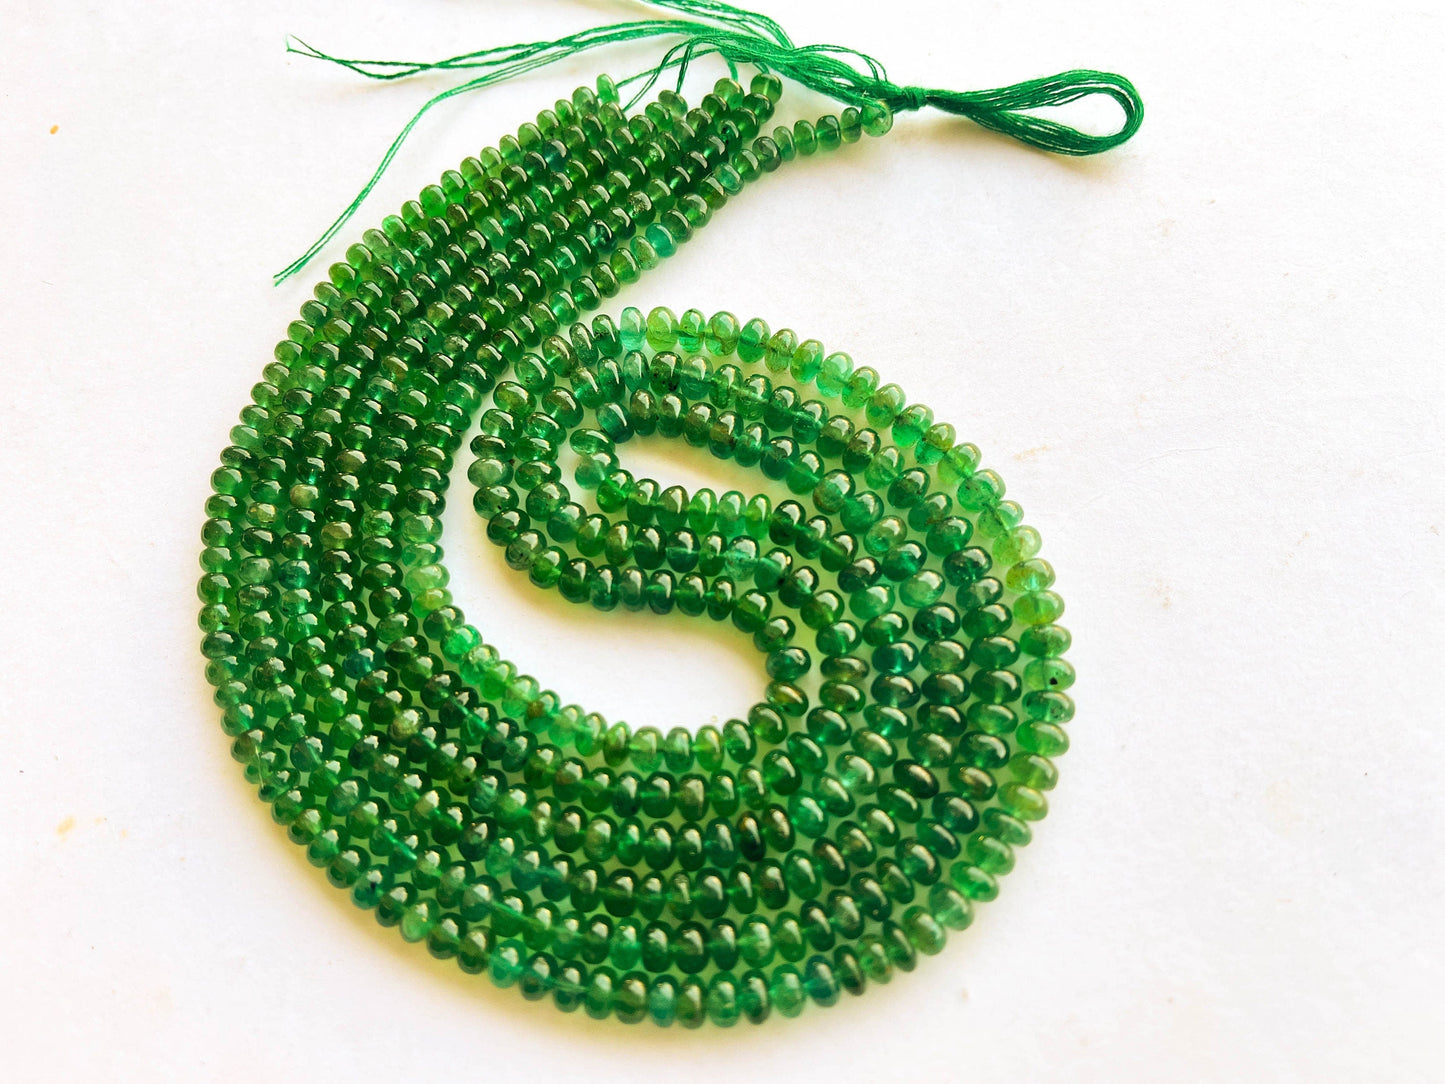 16 Inch Natural Zambian Emerald Smooth Rondelle Shape Beads (No Treatment) Beadsforyourjewelry